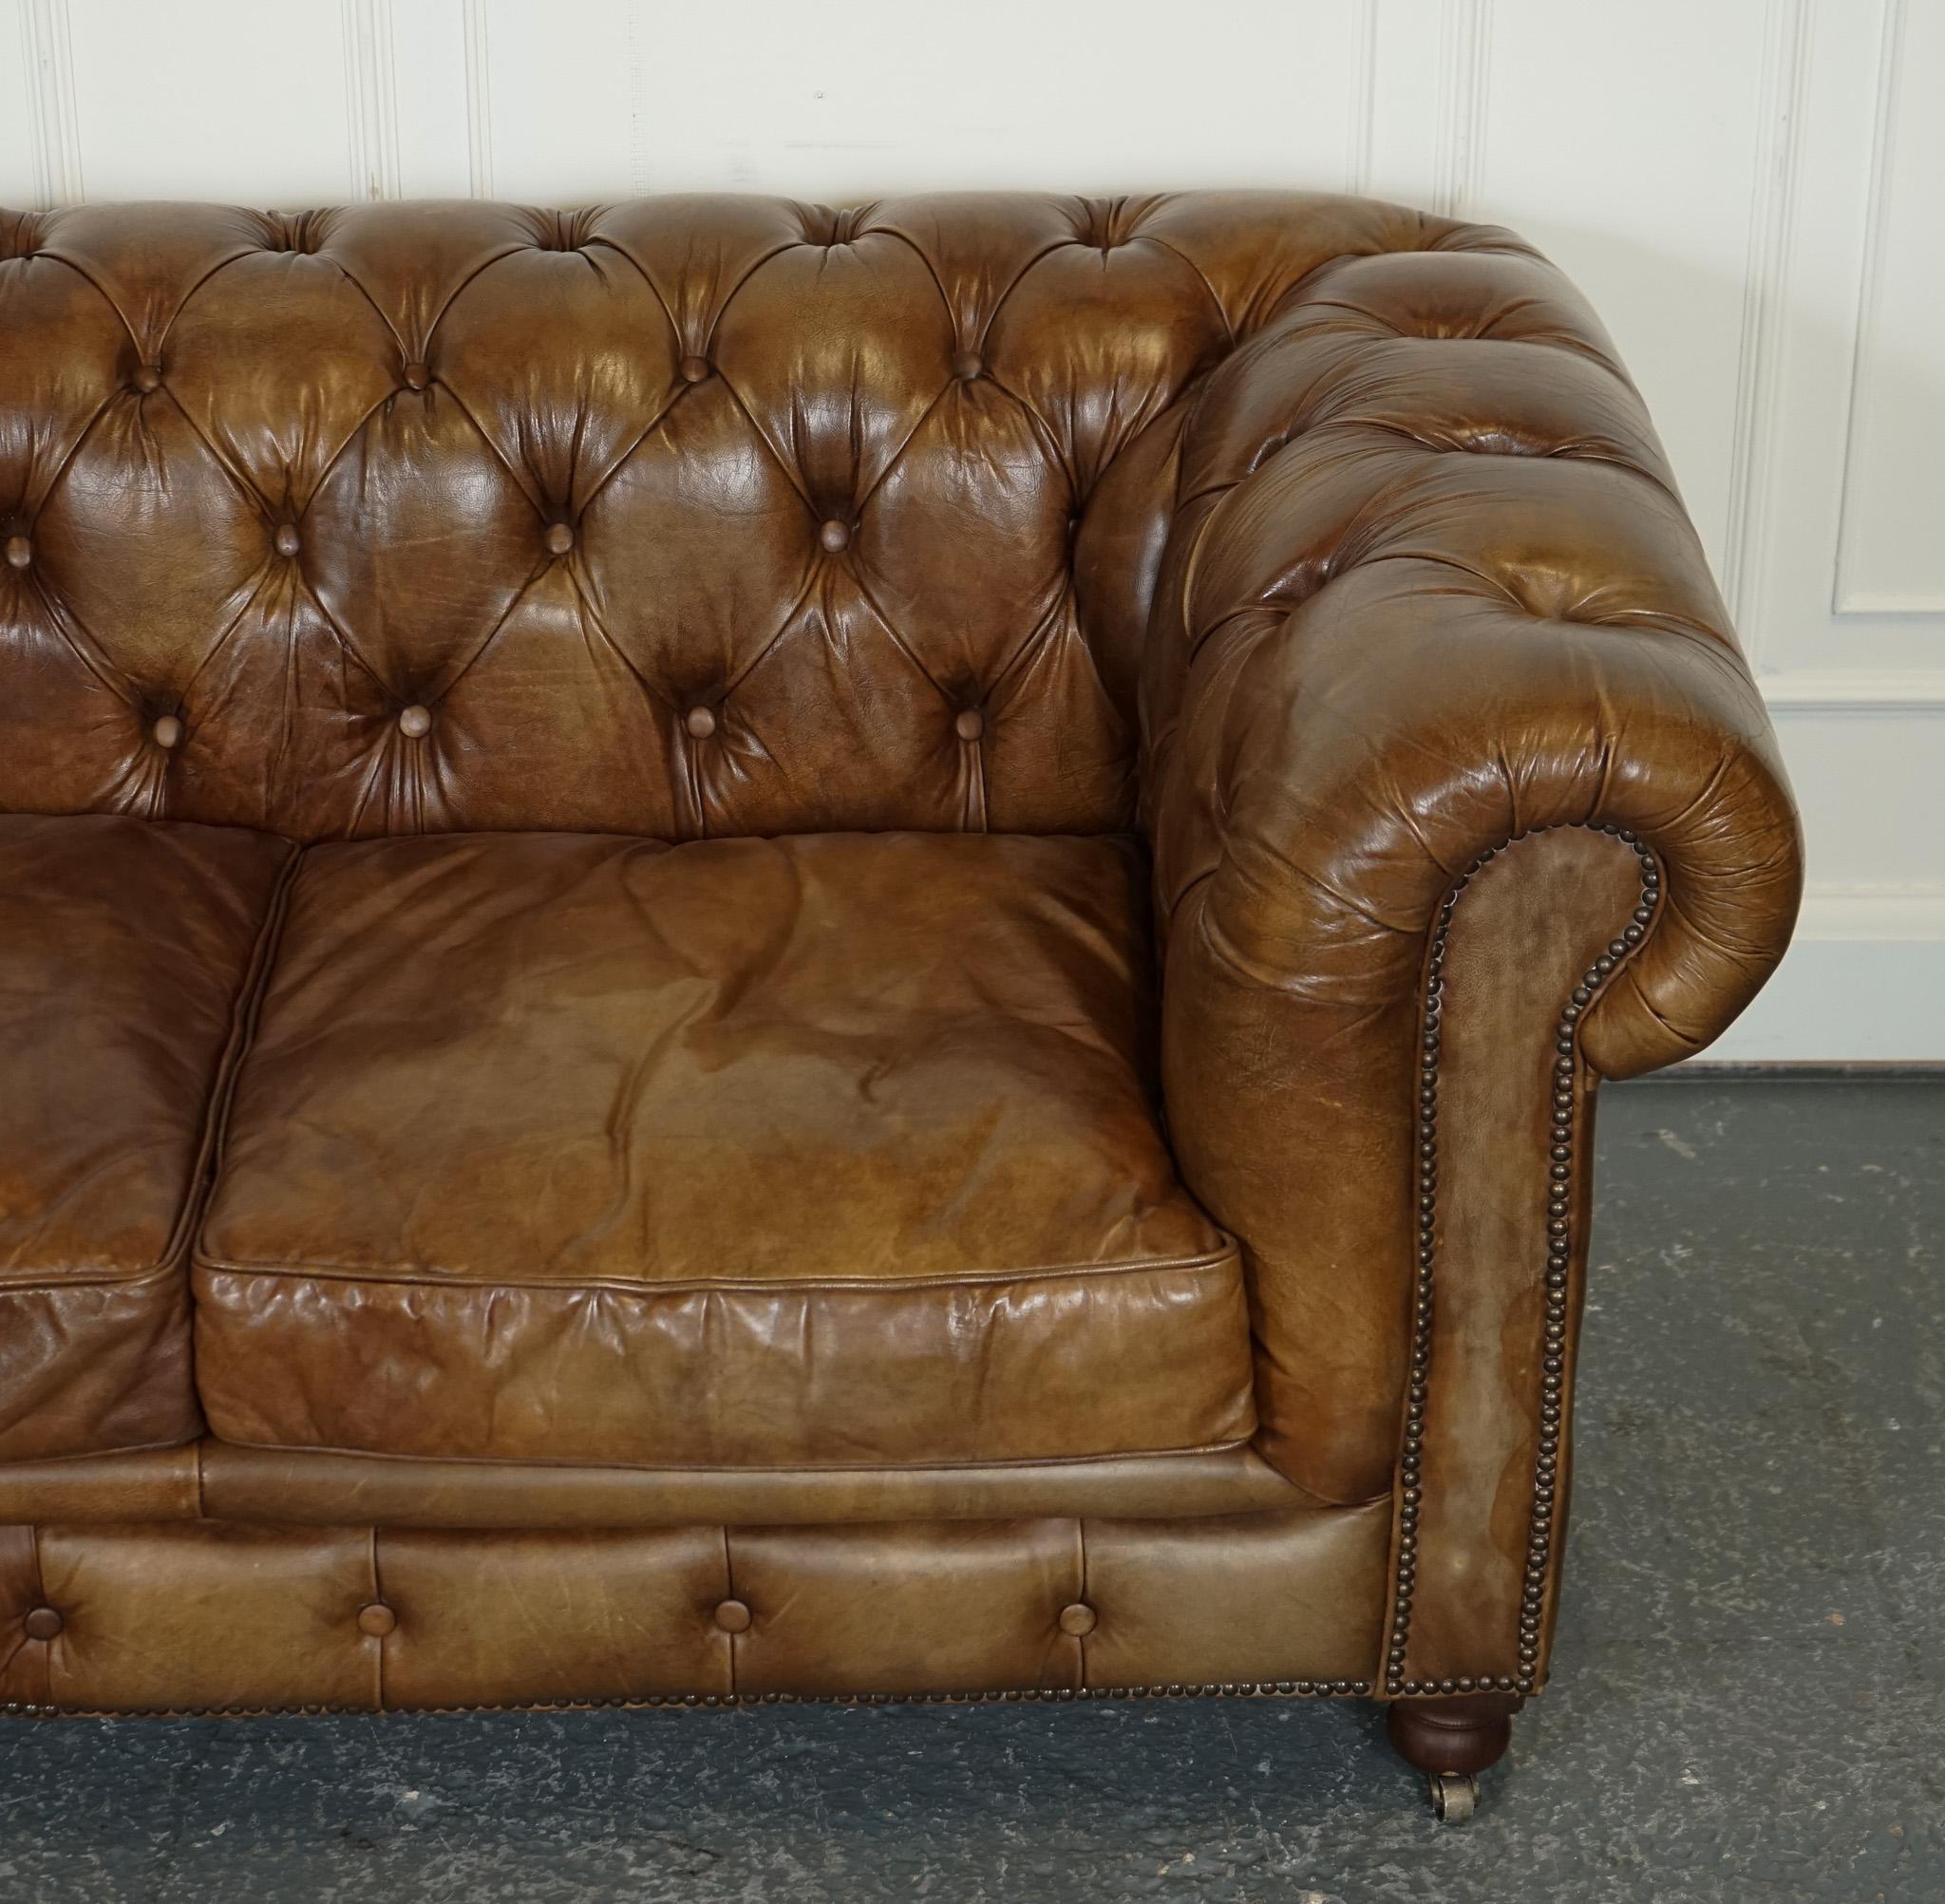 Hand-Crafted GORGEOUS TIMOTHY OULTON CHESTERFIELD SOFA BY HALO HERiTAGE BROWN LEATHER J1 For Sale